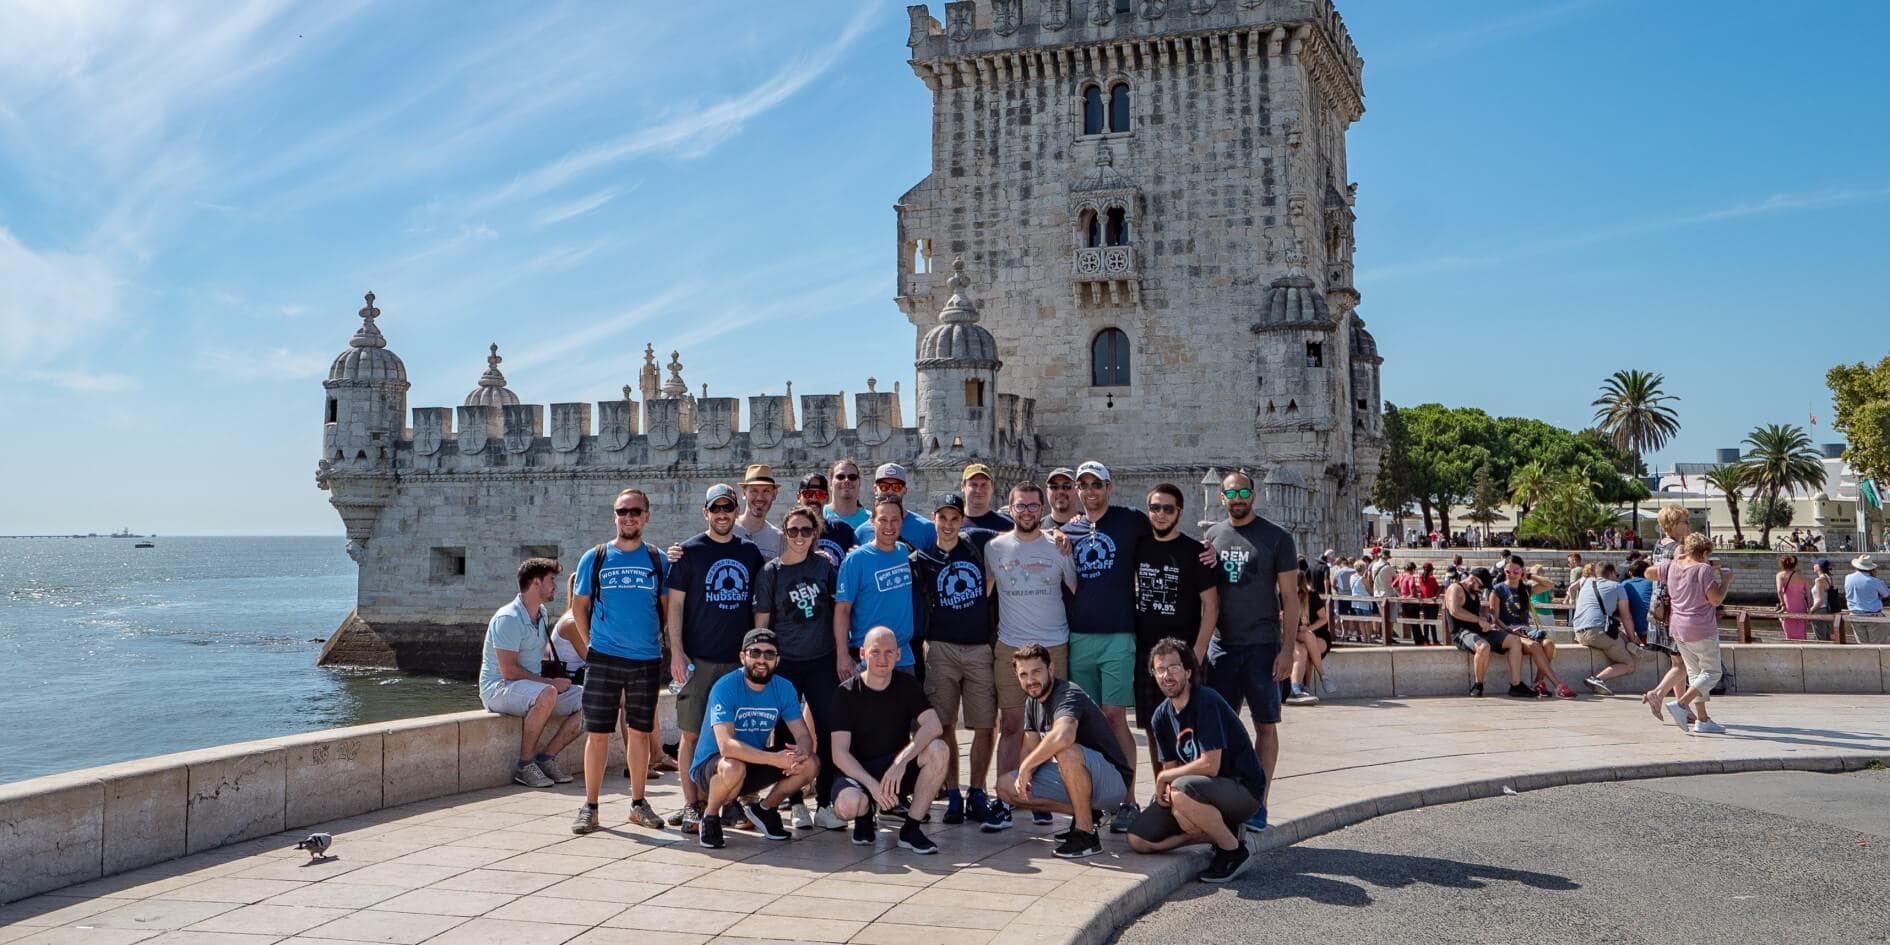 hubstaff team on annual retreat in front of tower belem